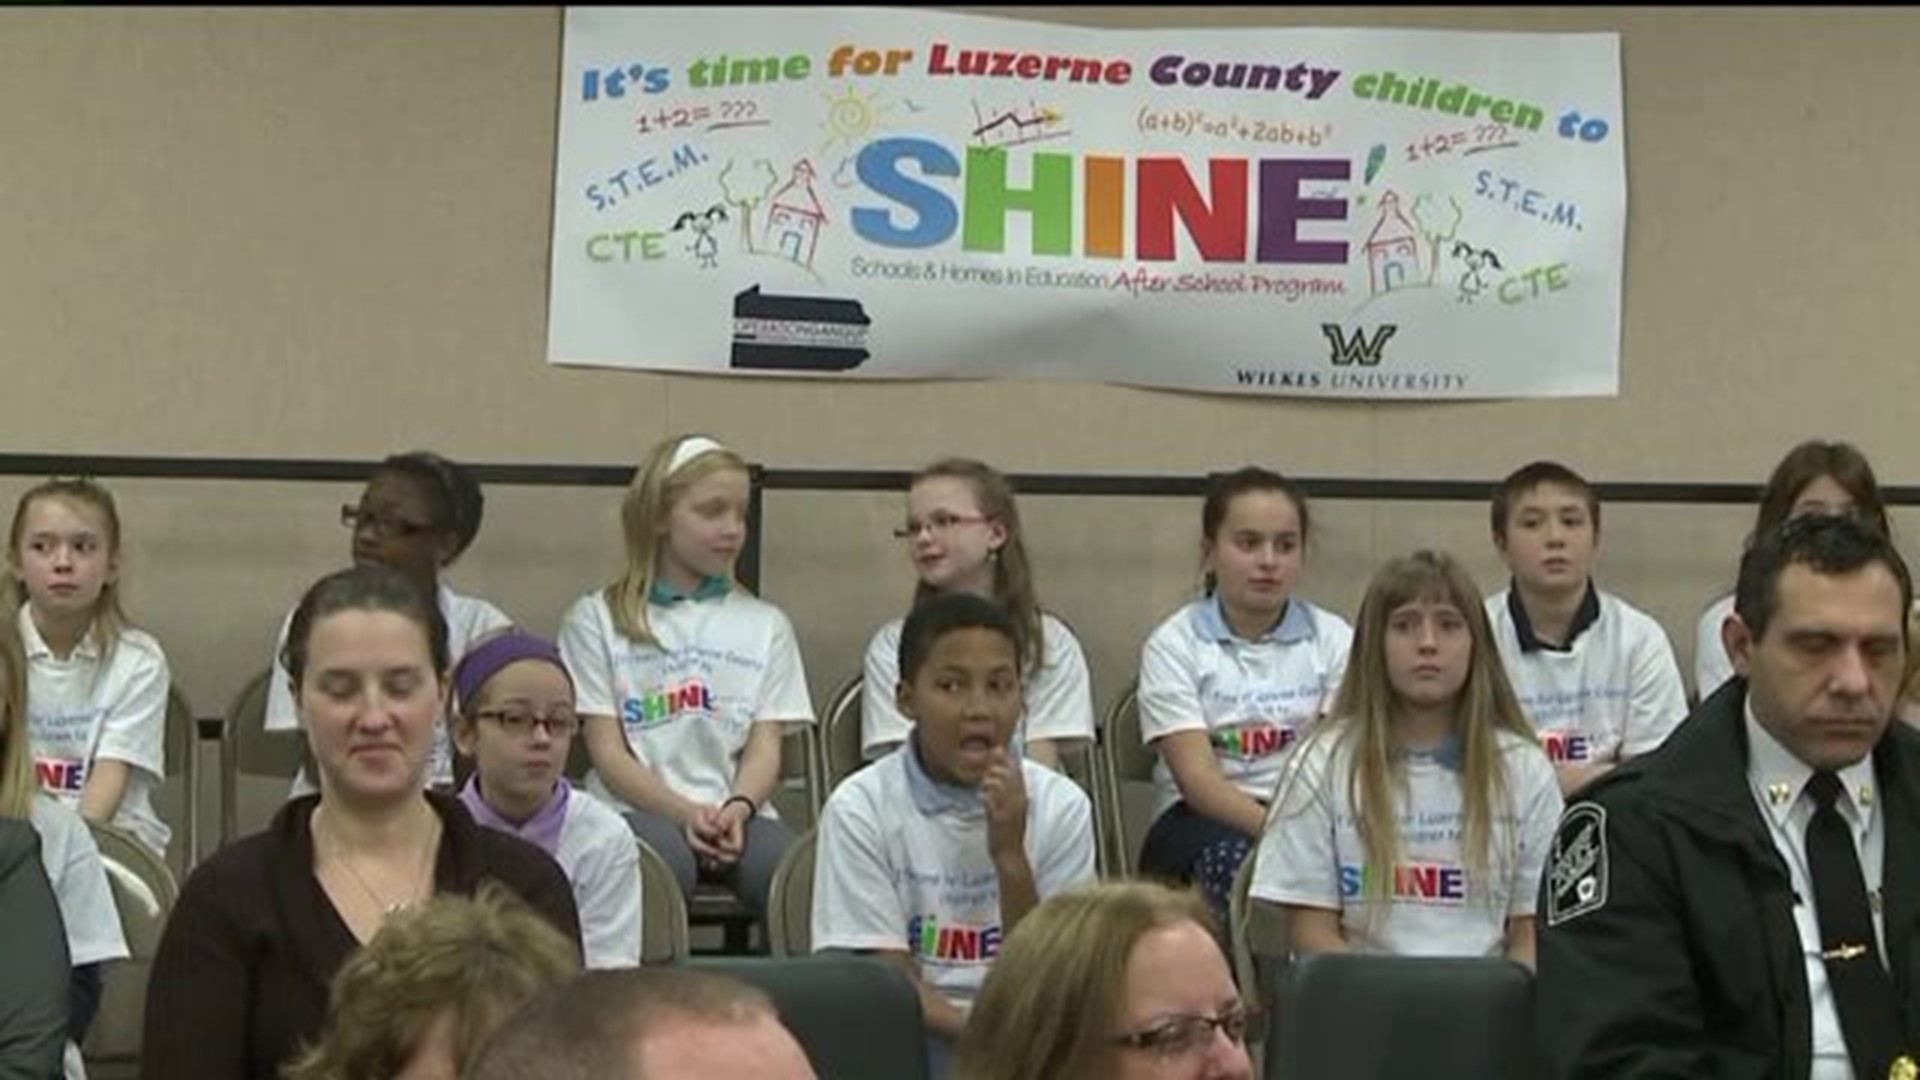 New Program Aims to Help Students "SHINE"